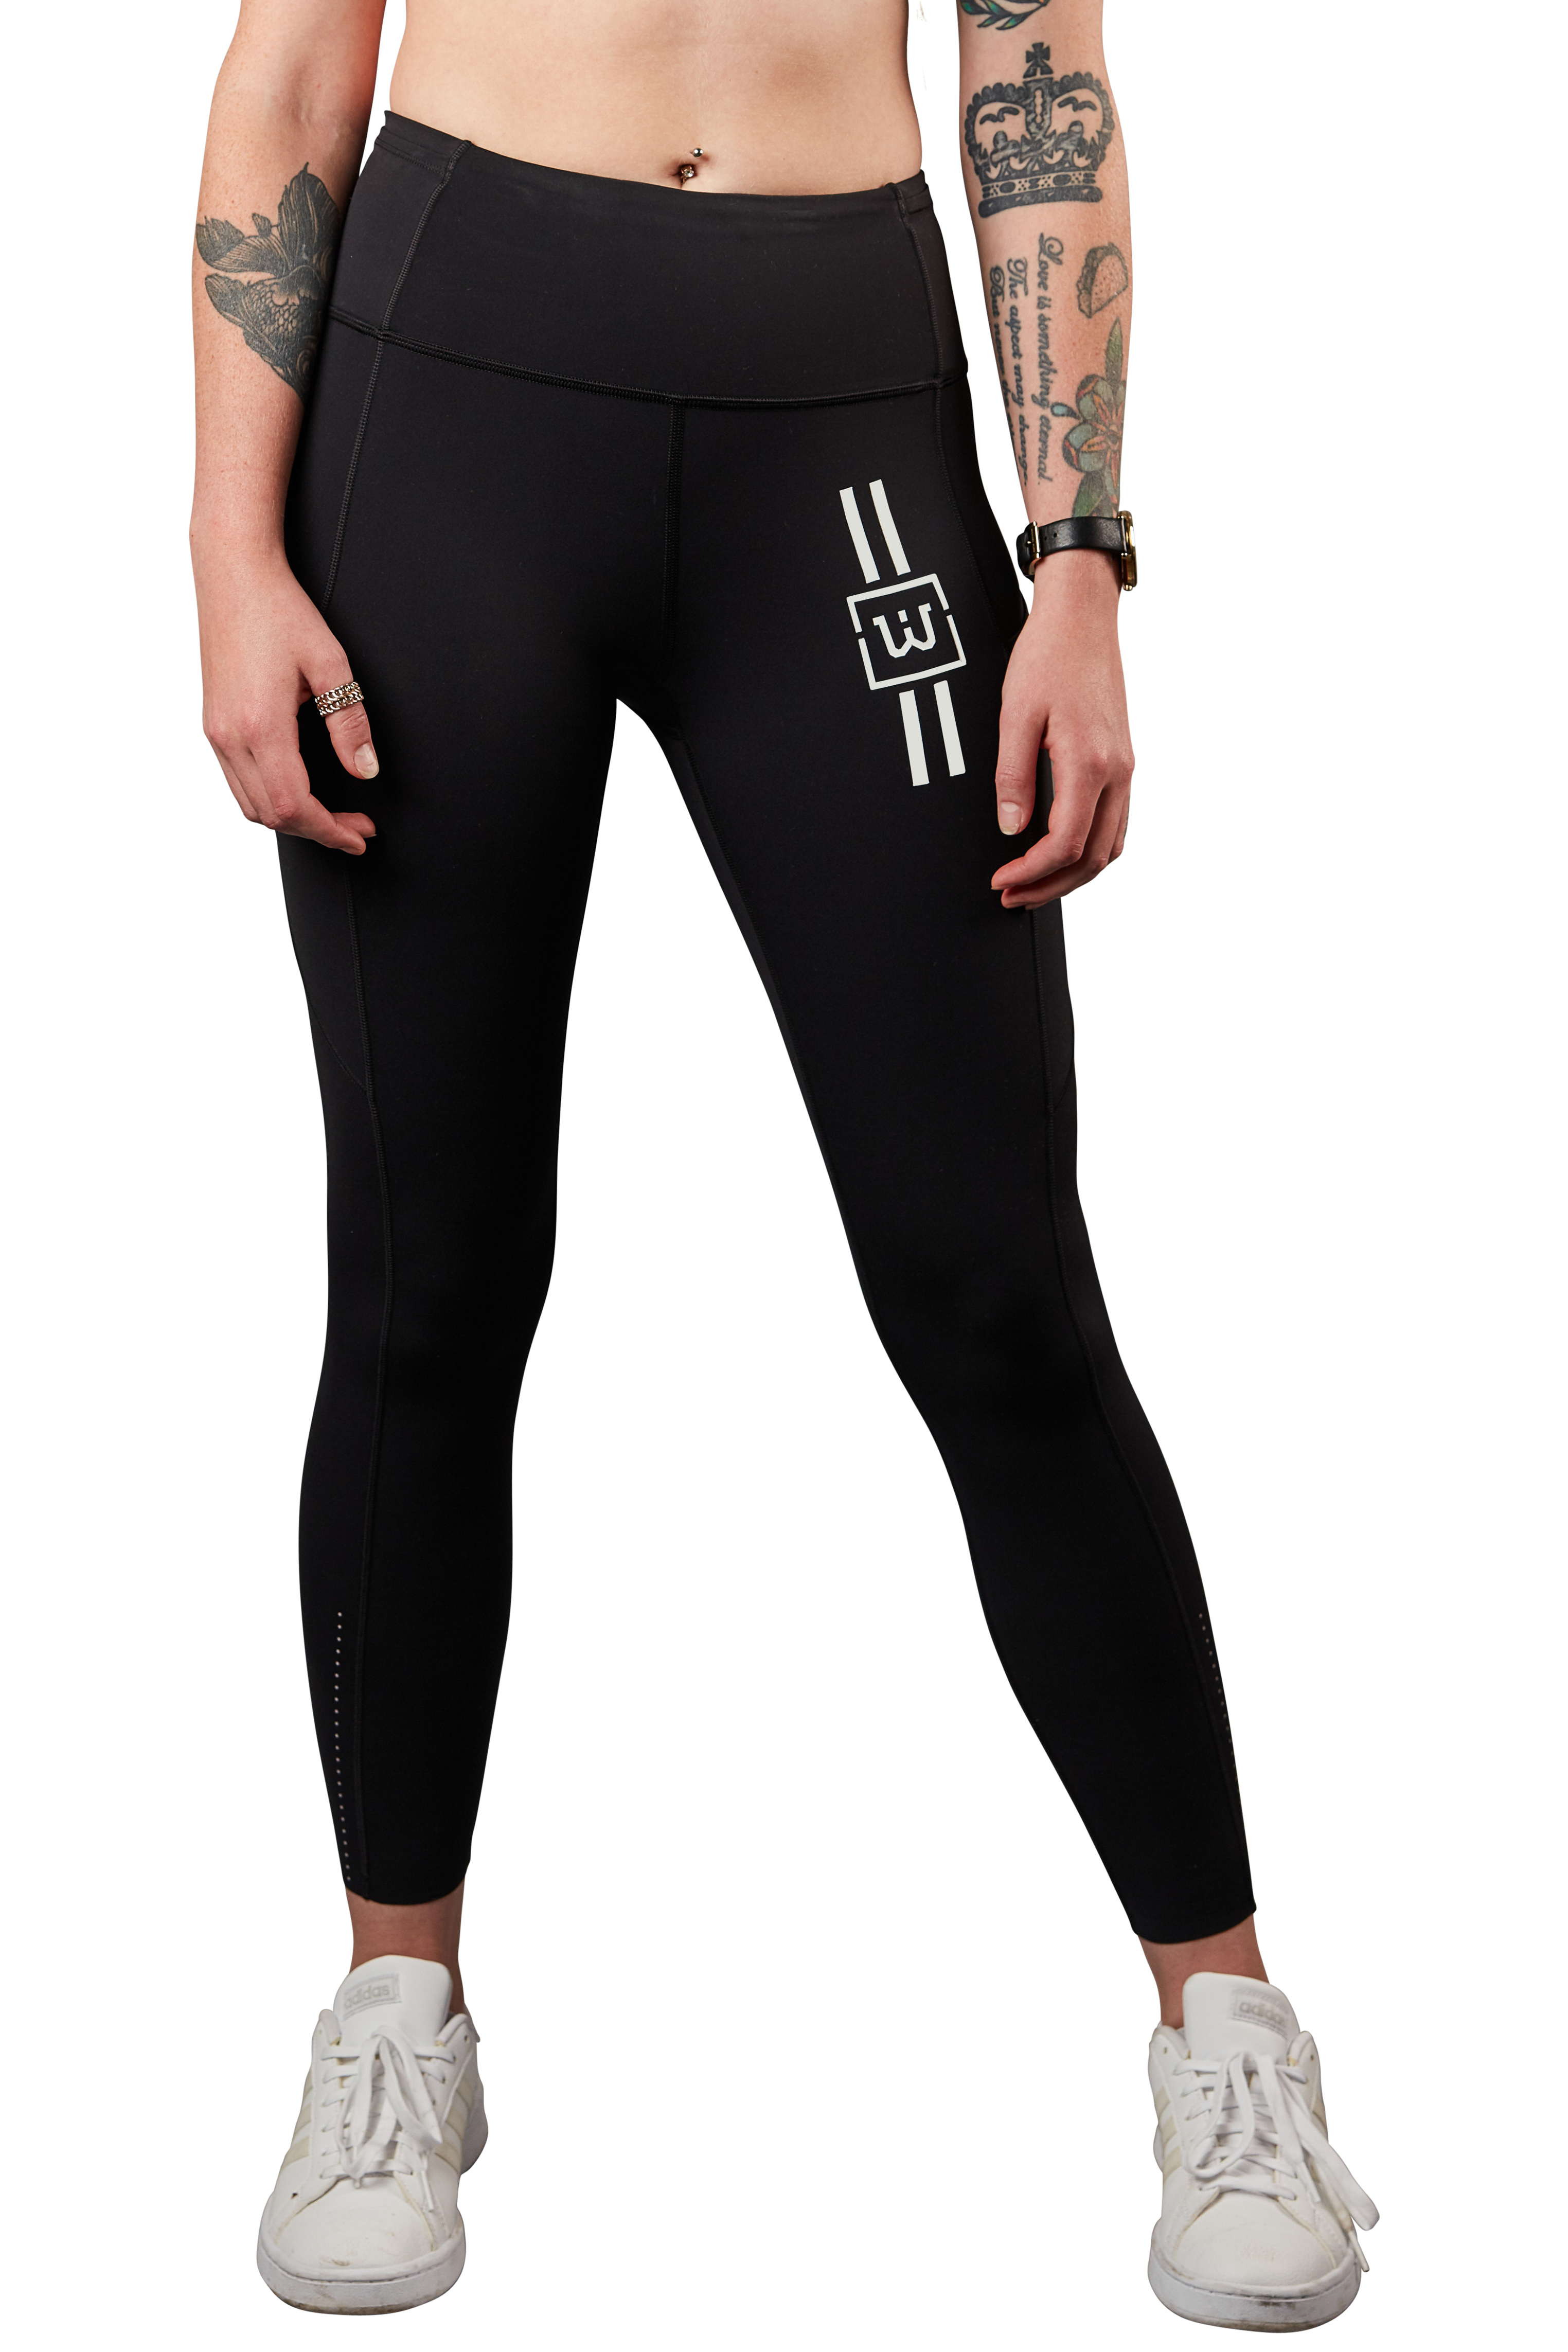 Lululemon Fast and Free Tight II 25 *Non-Reflective Nulux - Dark